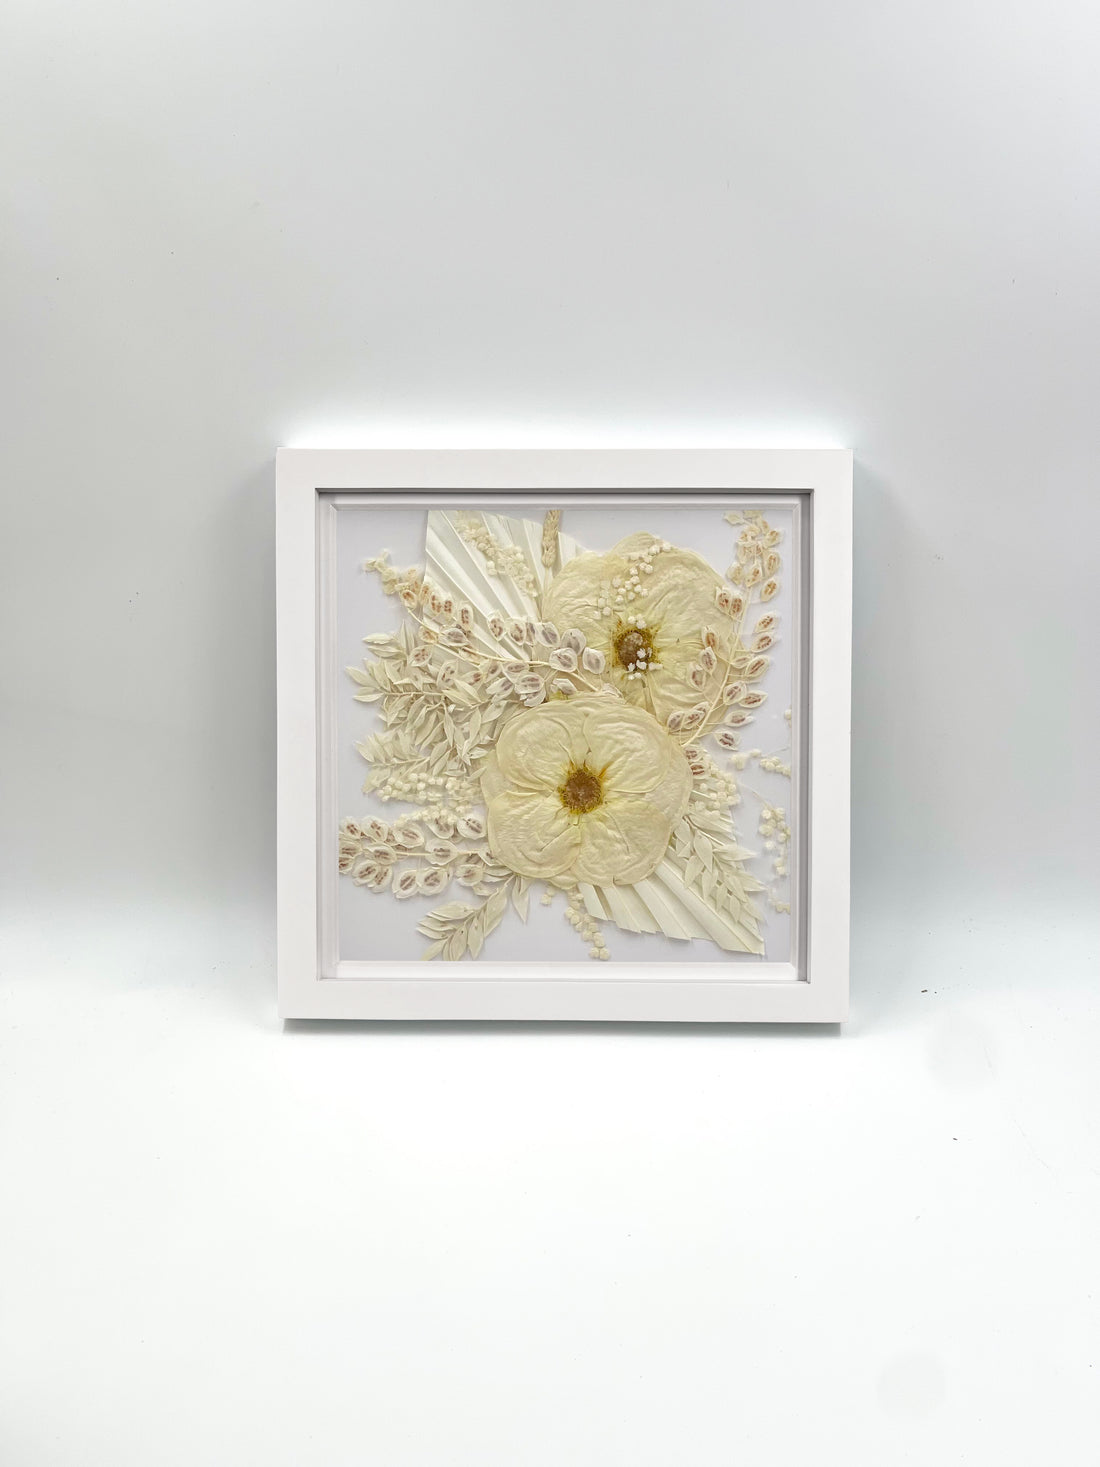 An all-white bridesmaid bouquet preserved and styled inside a white 10x10" frame on a white background